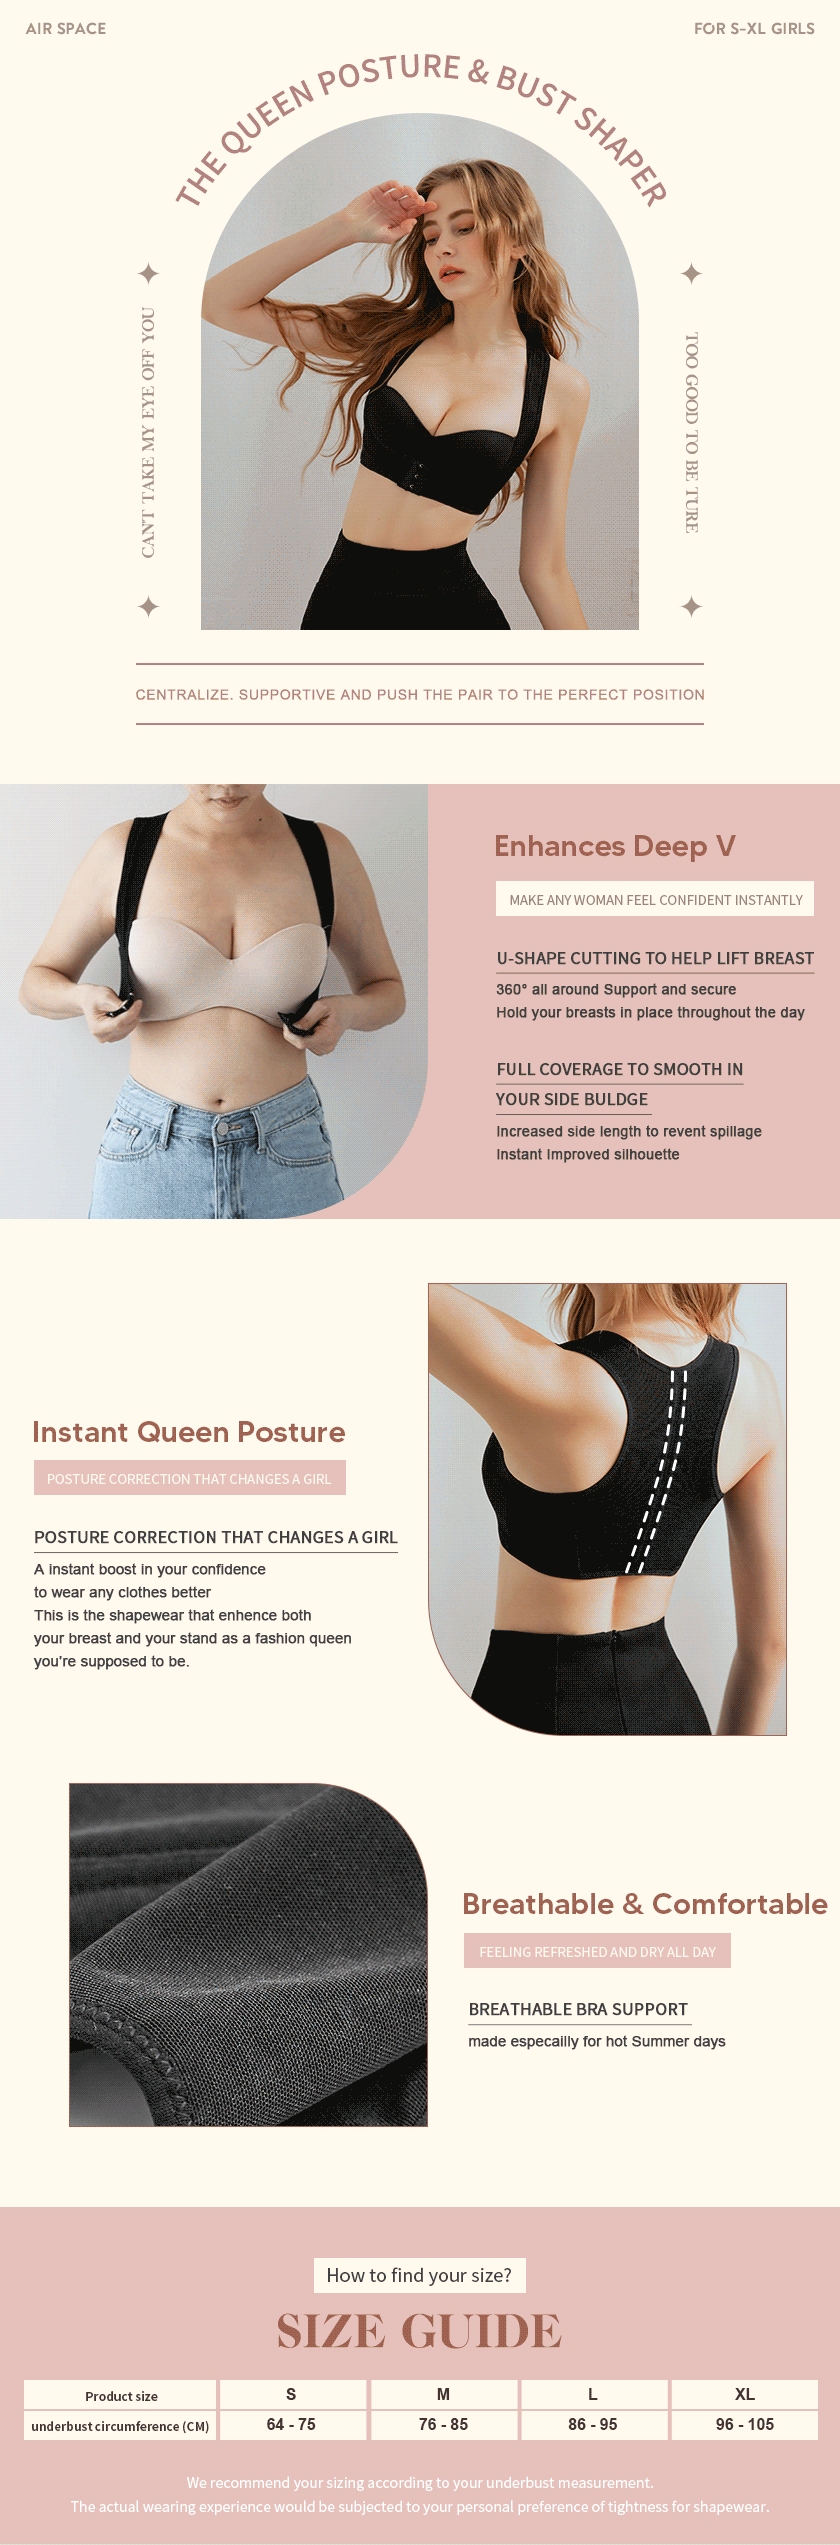 The Queen Posture & Bust Shaper - AIR SPACE